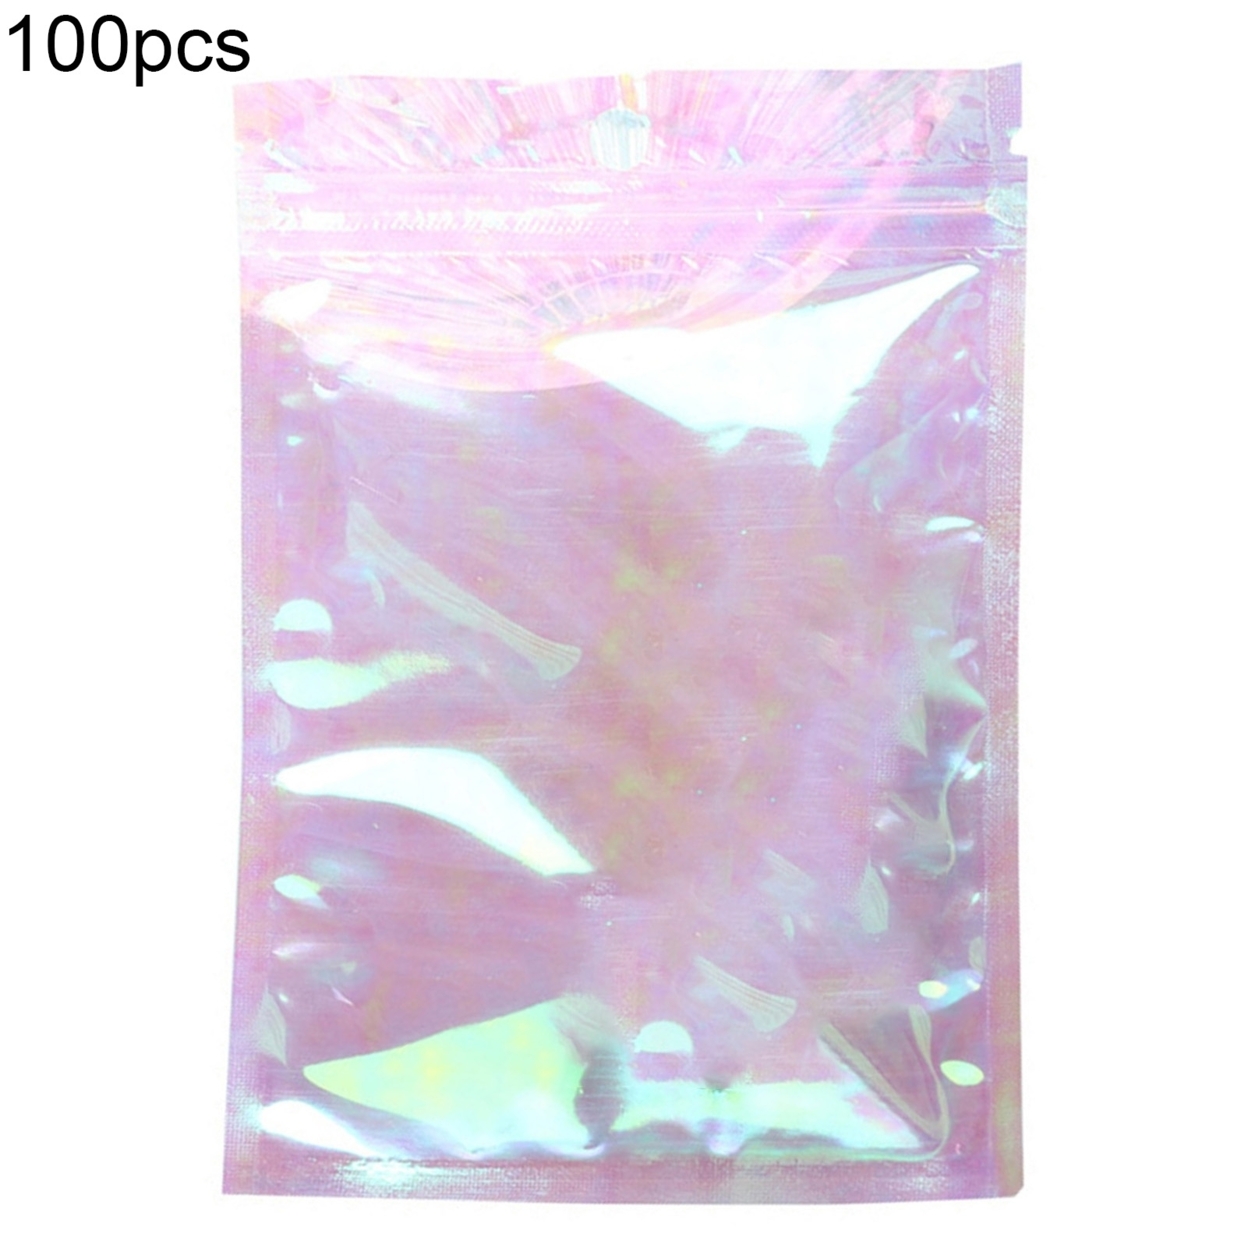 100Pcs Holographic Bags Dust-proof Large Capacity PET Flat Clear Zippered Resealable Bags for Jewelry - 12x20cm